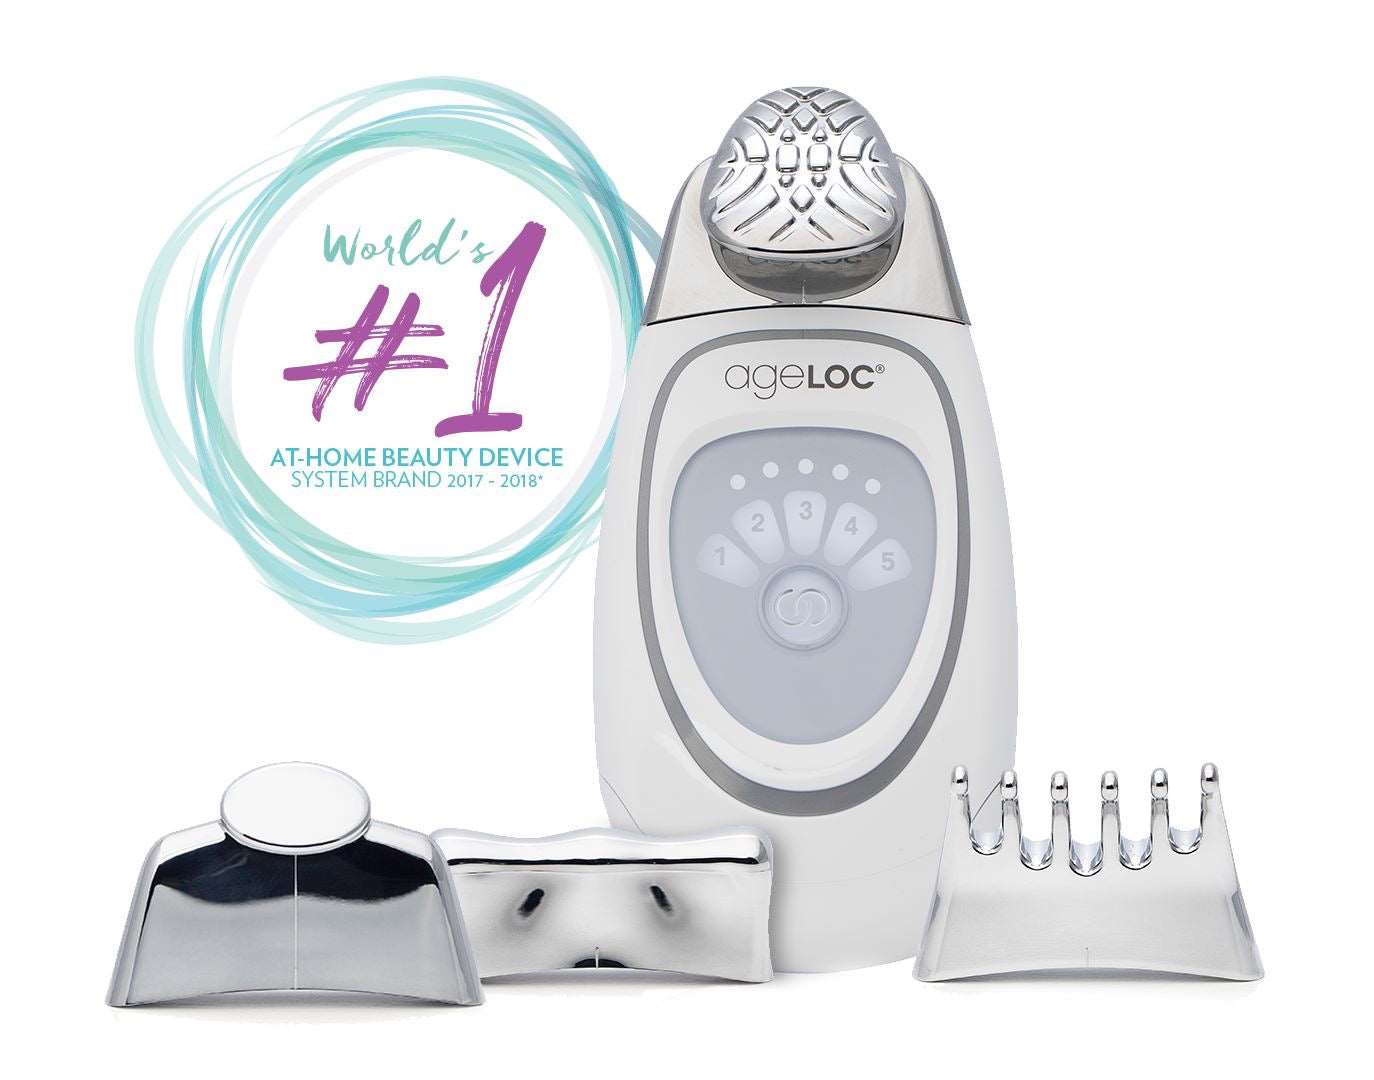 Galvanic Spa No 1 Beauty devices 25% off